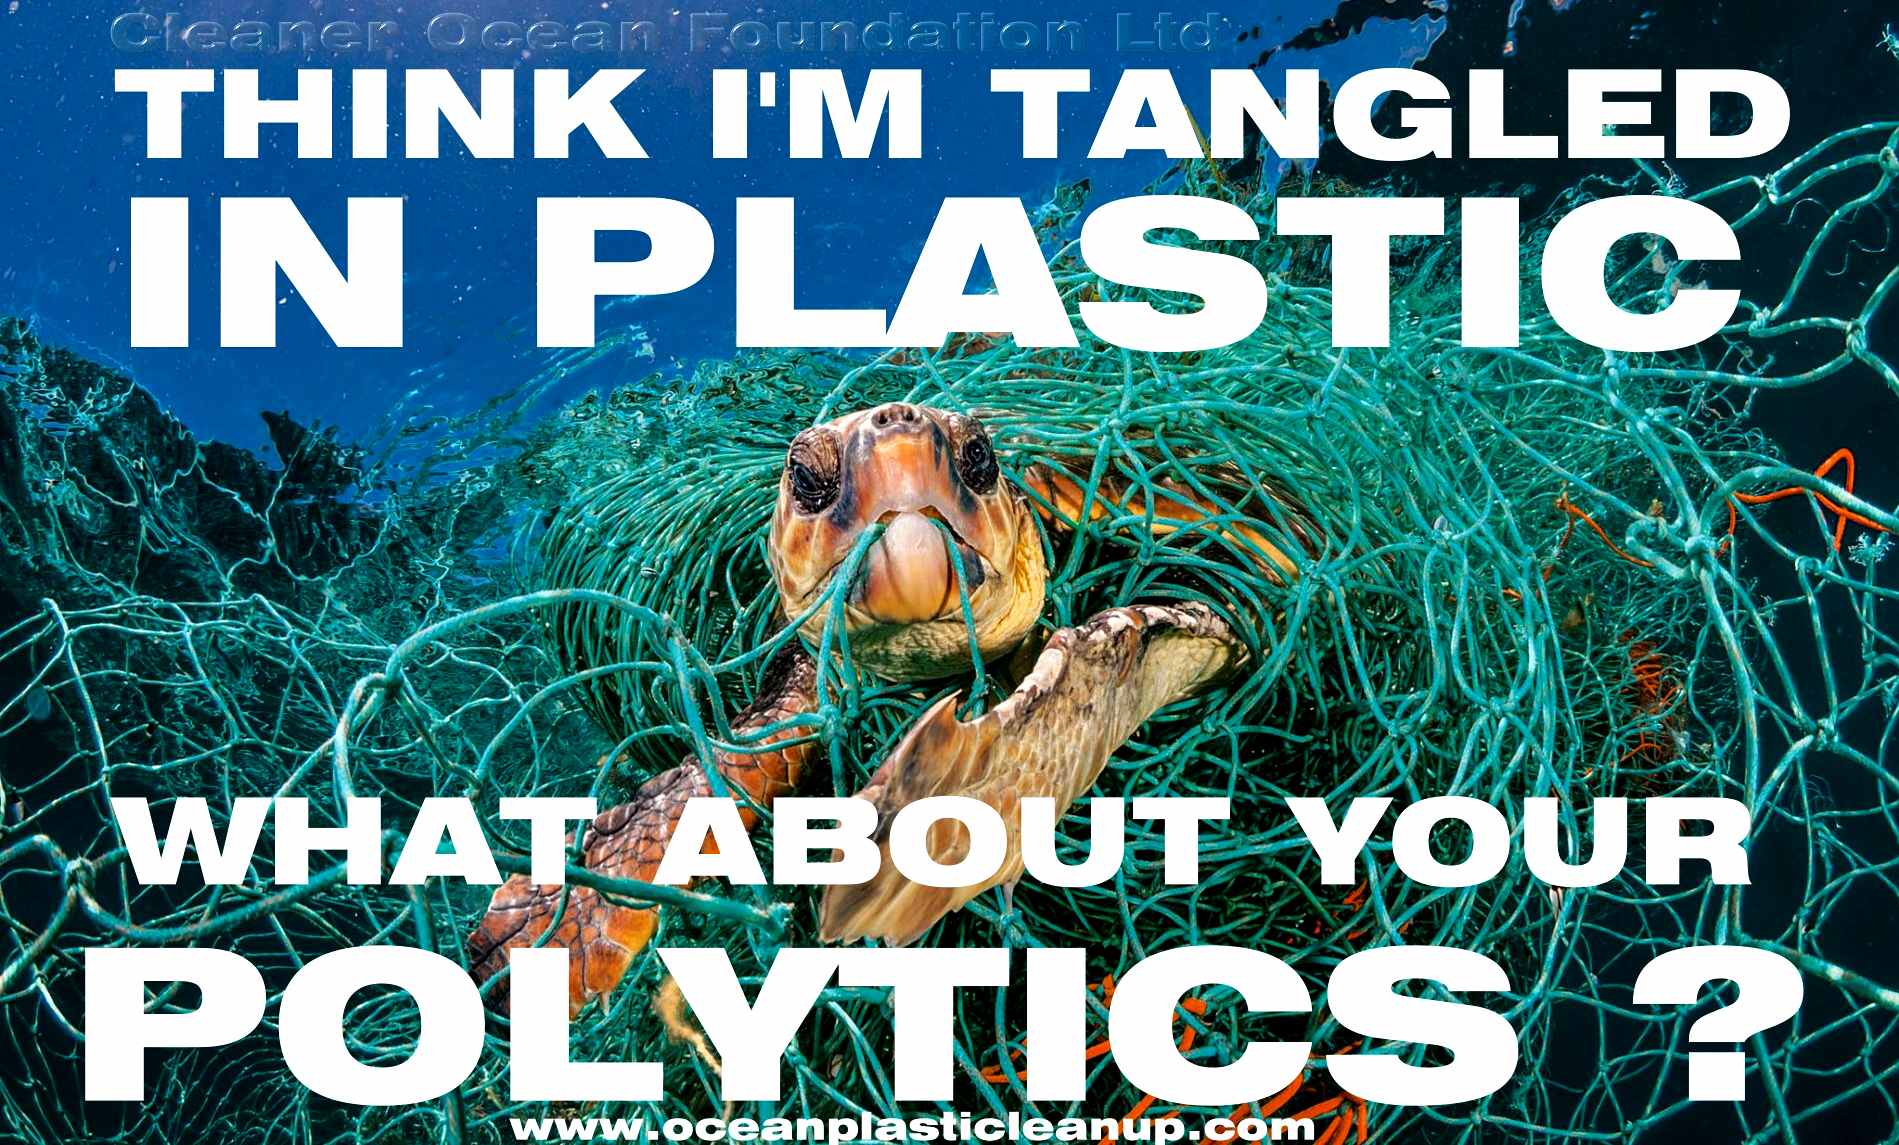 Politicians are so into plastic that they are blind to the pollution that is poisoning our oceans